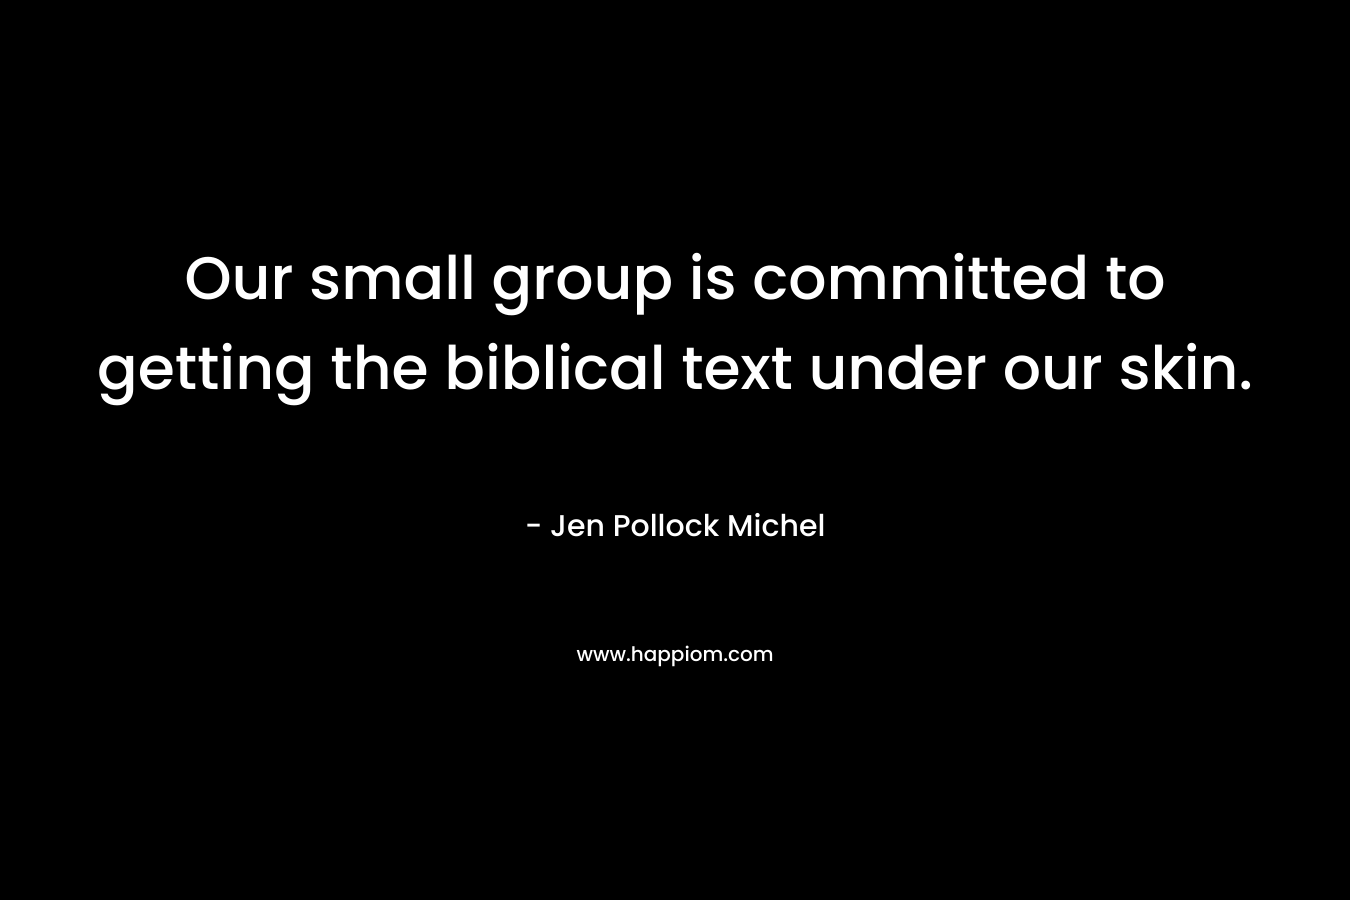 Our small group is committed to getting the biblical text under our skin.